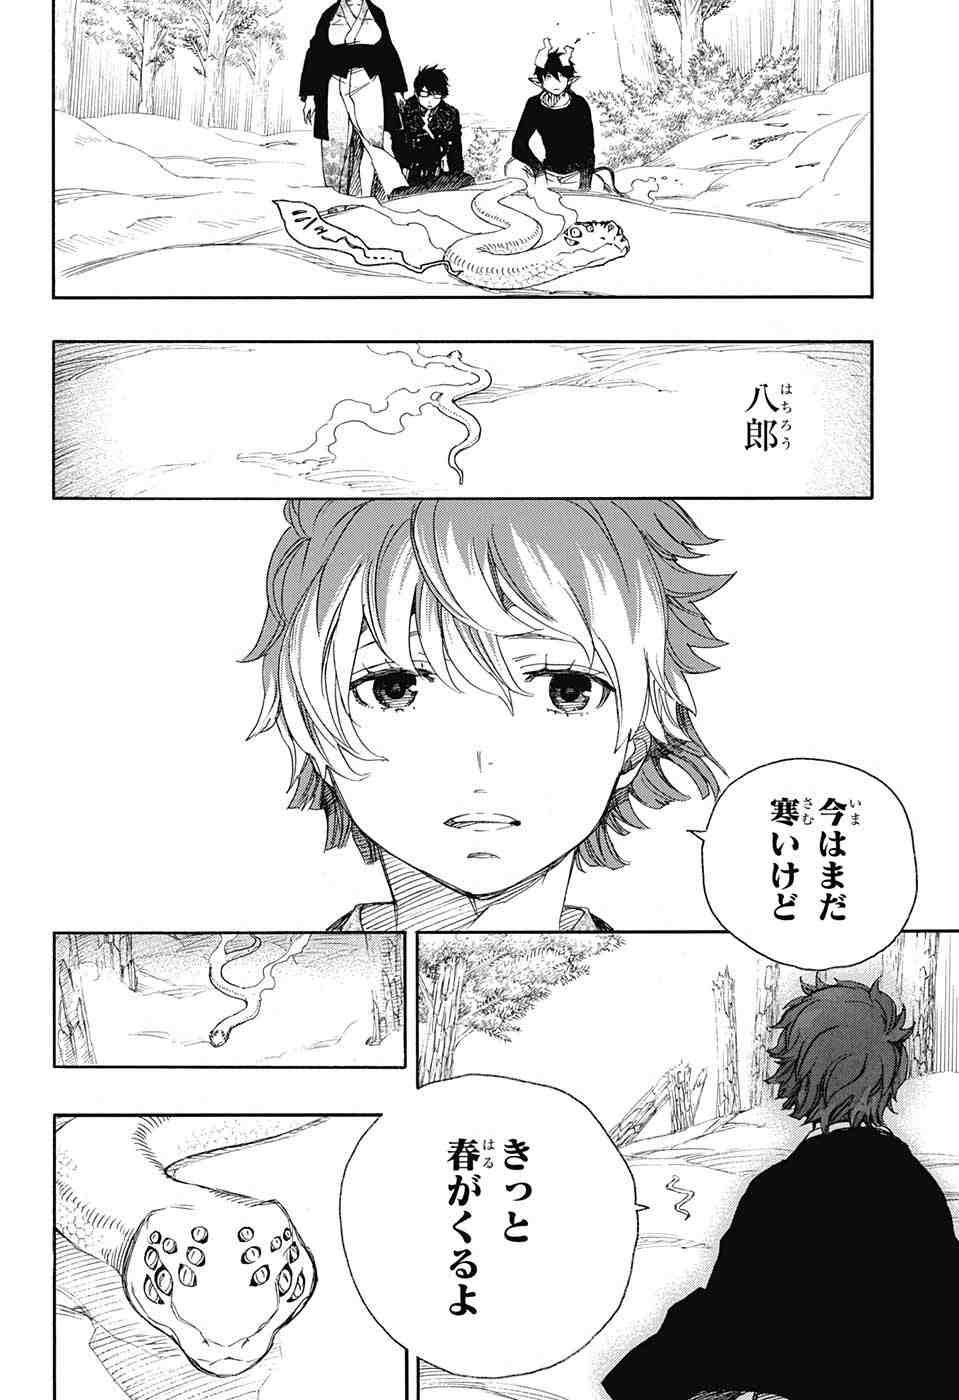 Ao no Exorcist - Chapter 79 - Page 33